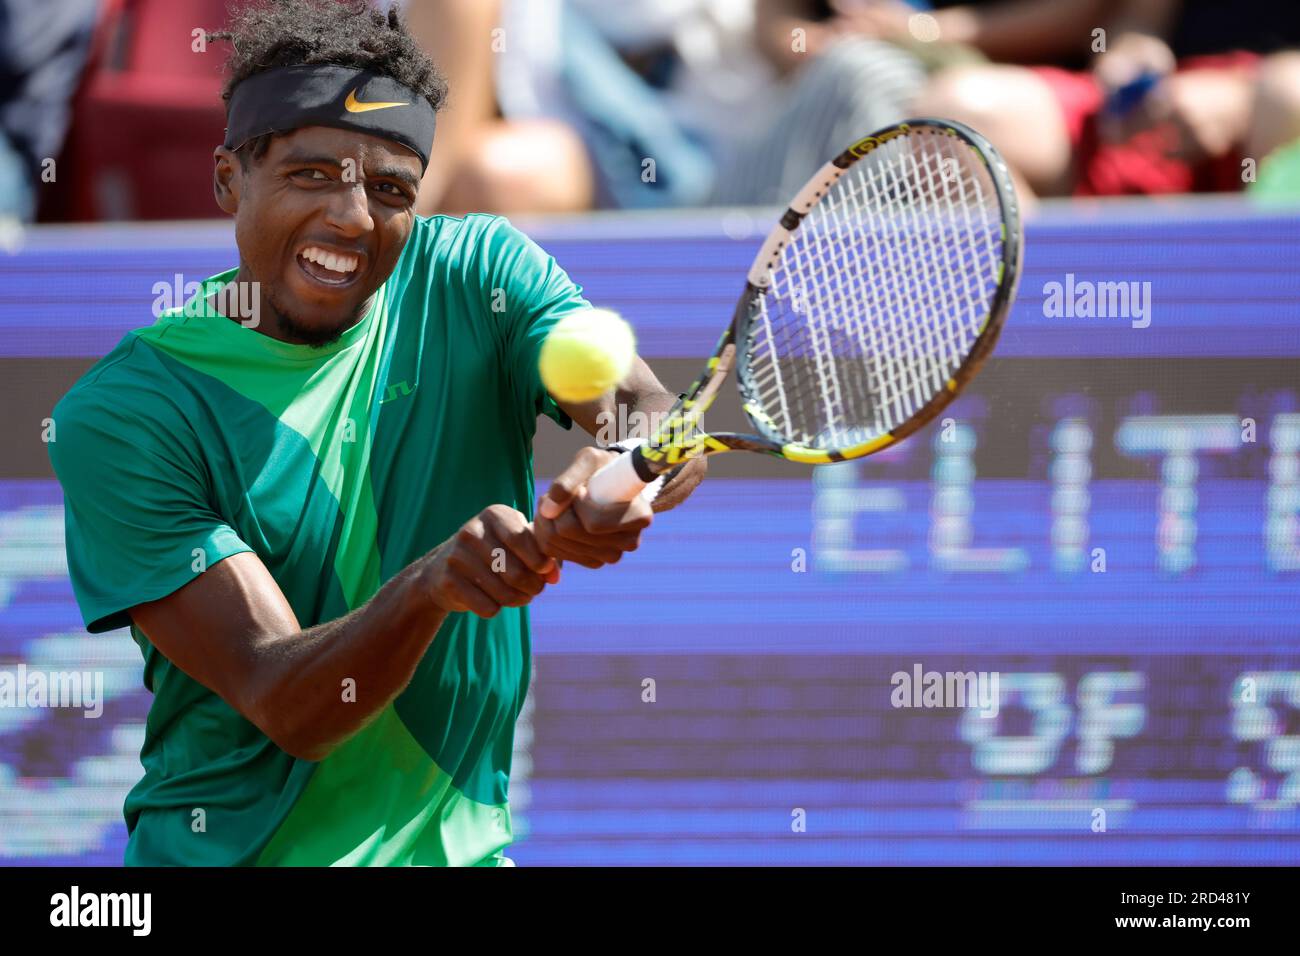 Elias Ymer of Sweden in action during a tennis match against Leo Borg of  Sweden during the Swedish Open ATP tennis tournament in Bastad, Sweden, on  July 18, 2023.Photo: Adam Ihse /